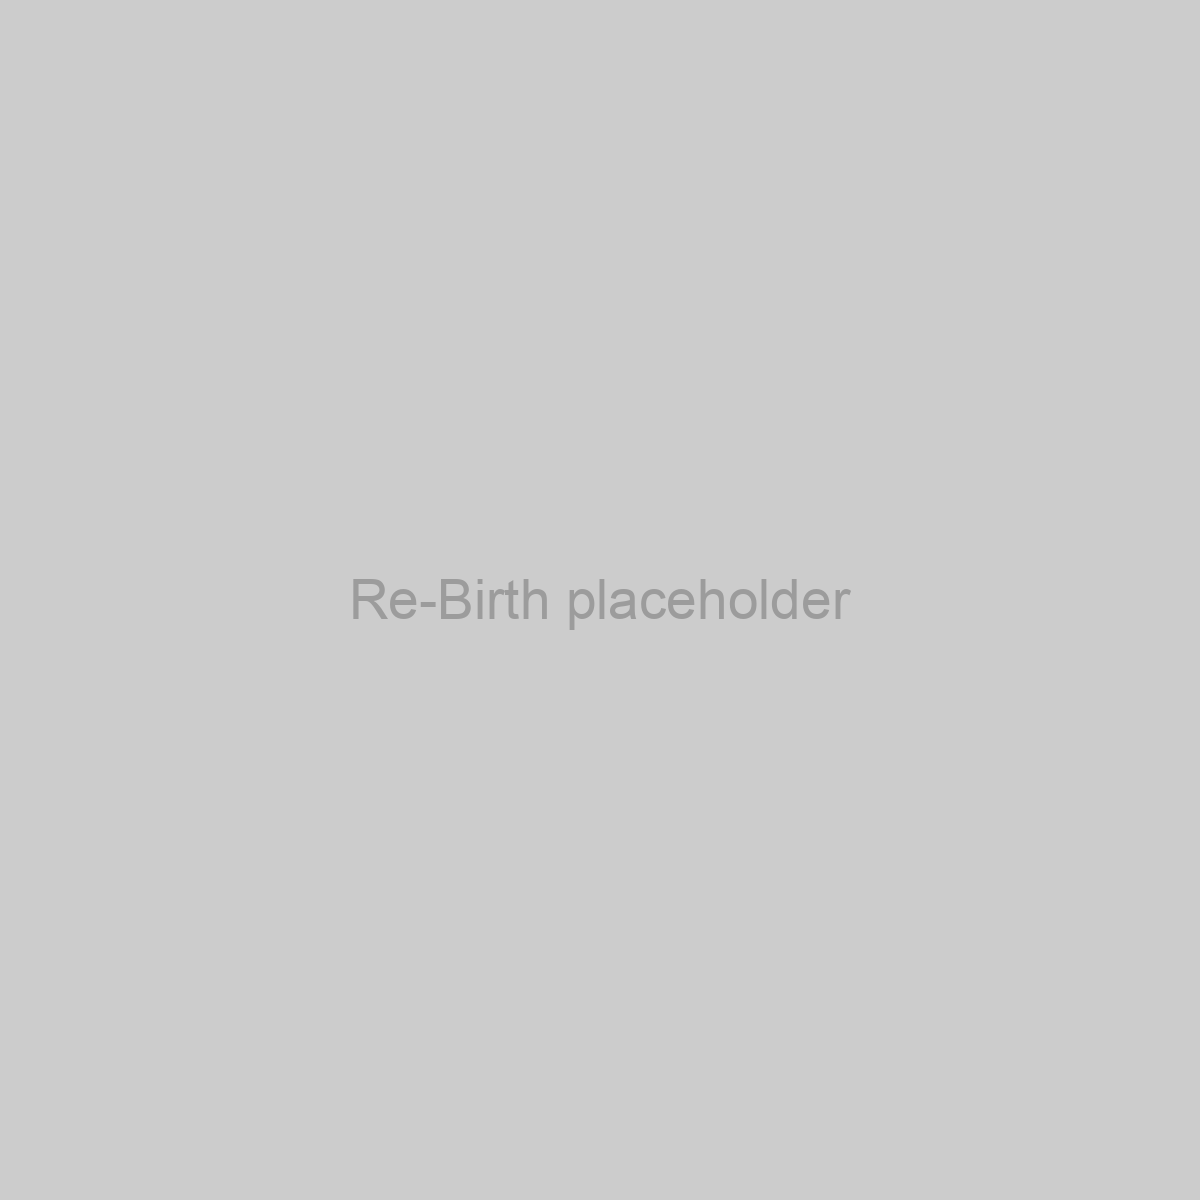 Re-Birth Placeholder Image